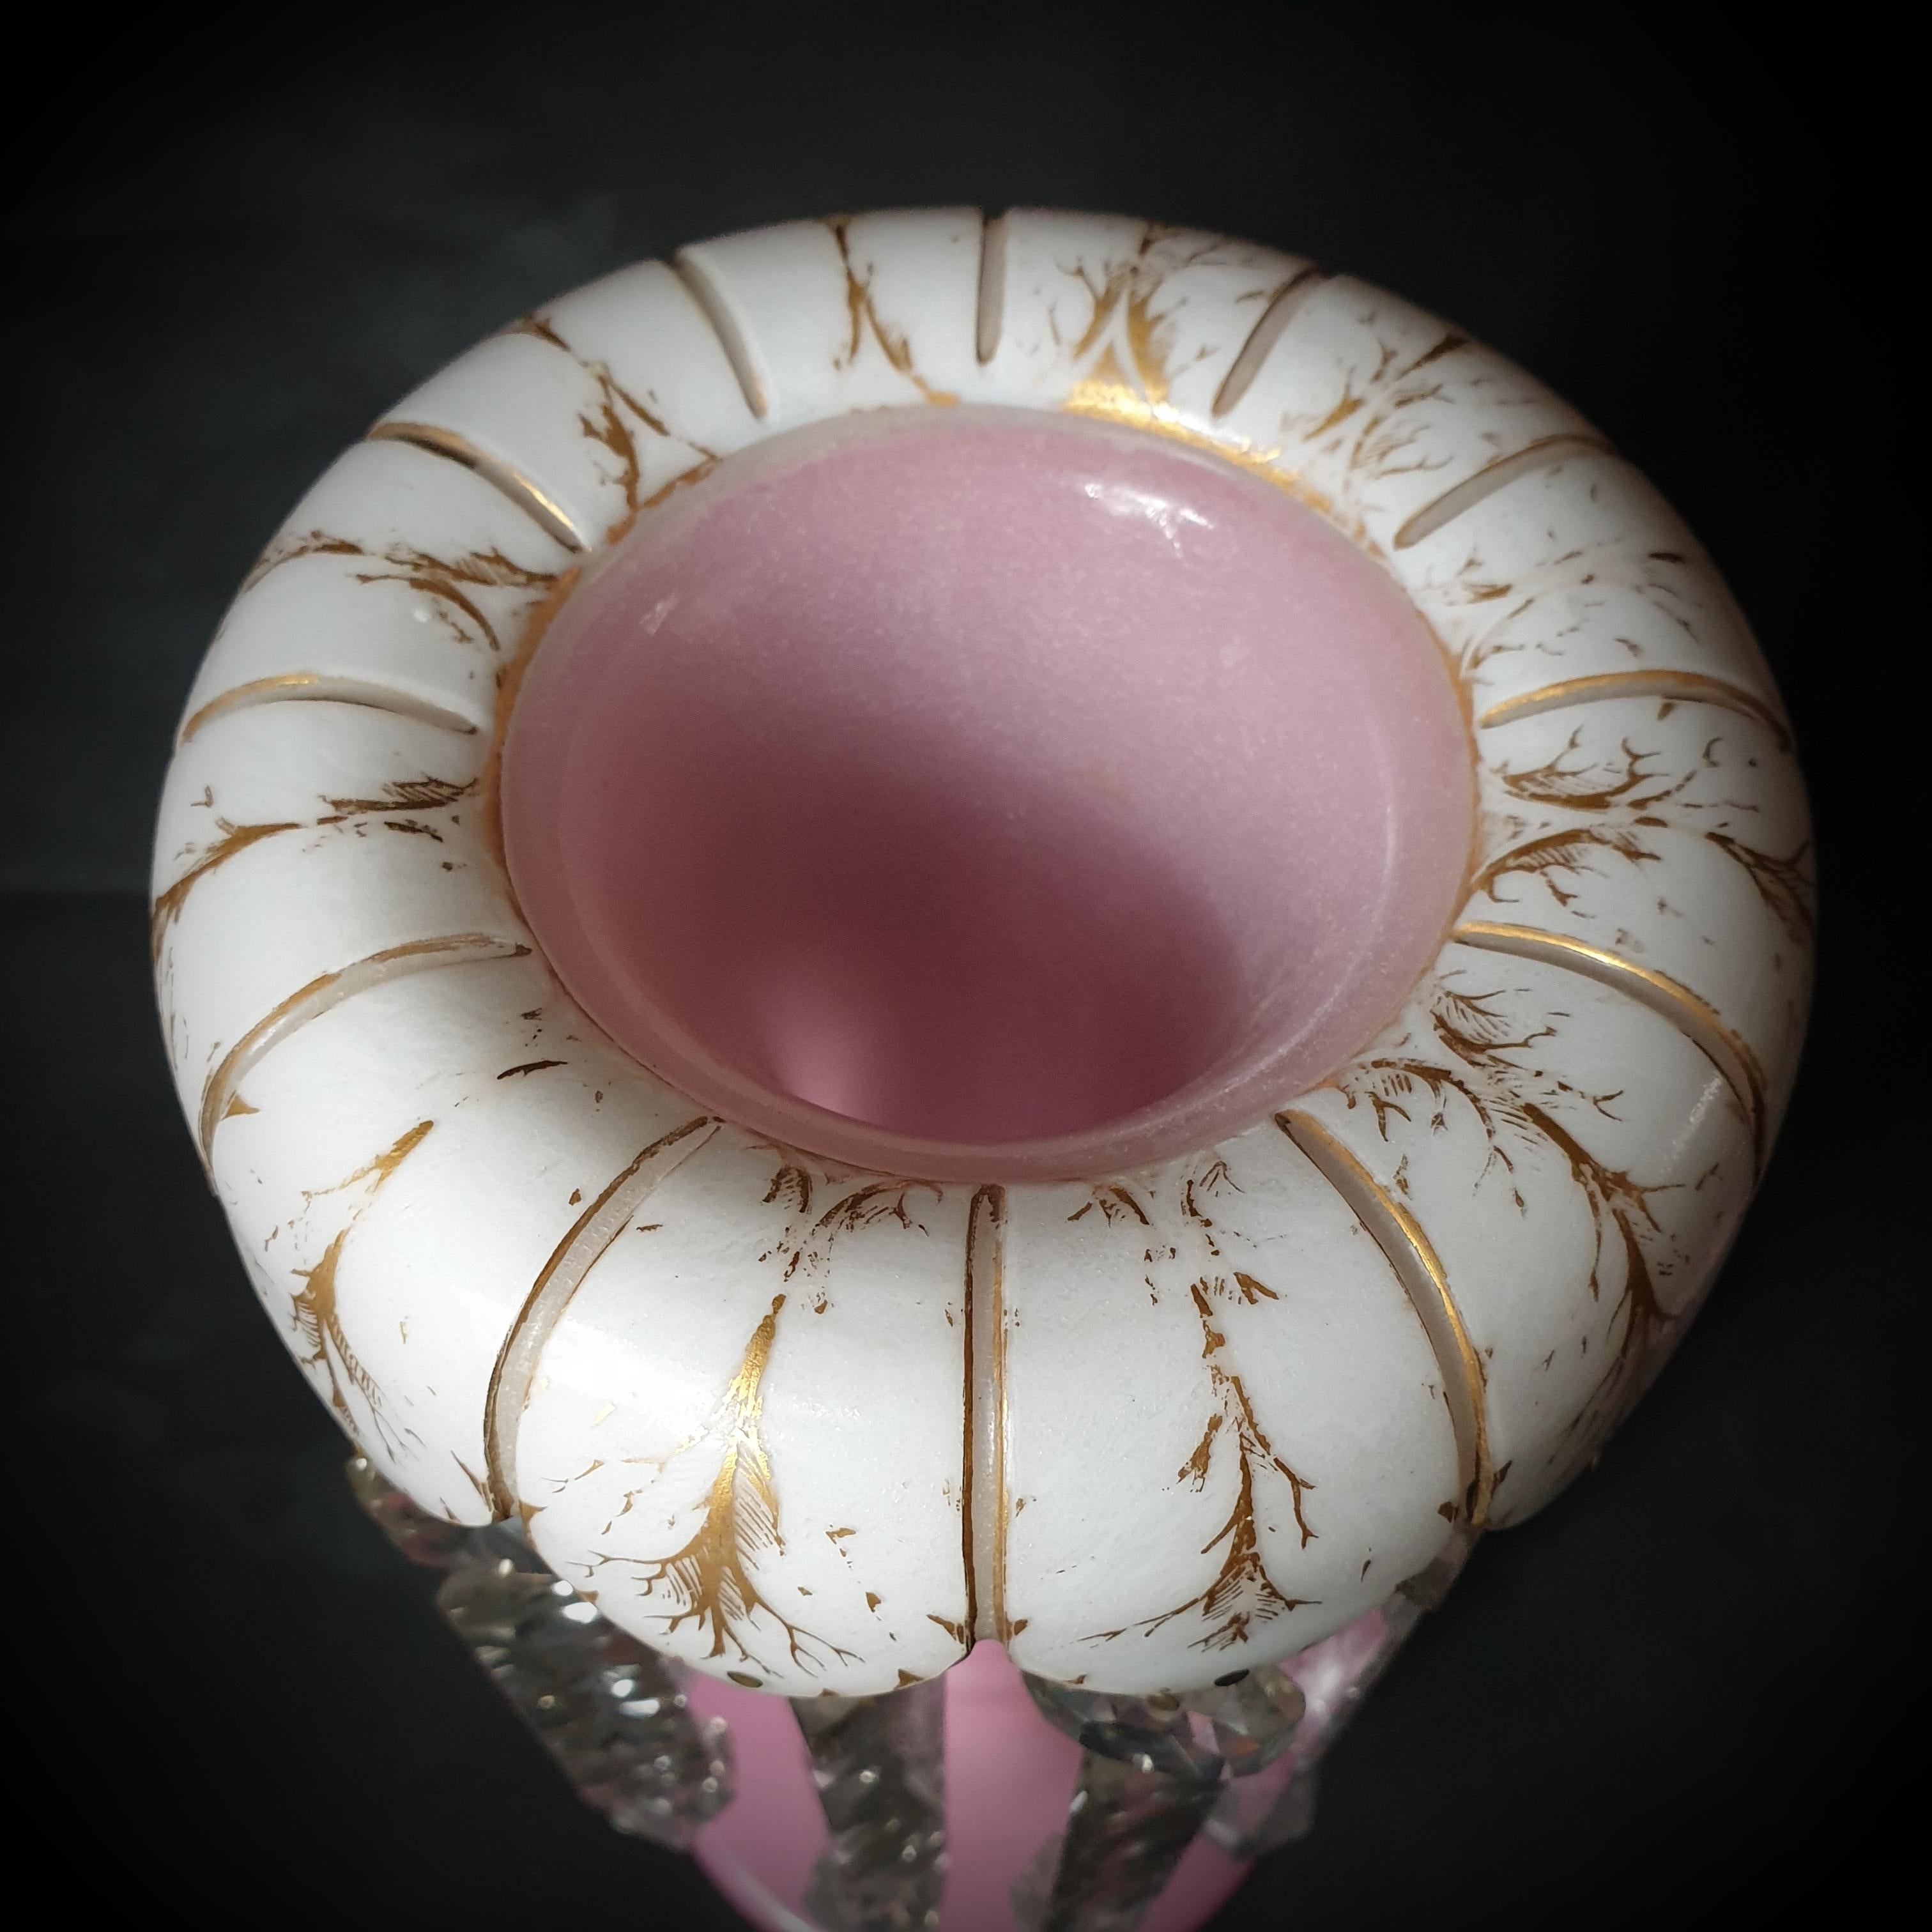 These exquisite French opaline glass lusters date to the 19th century and are now available for your house. Elegant goblet-shaped lusters, hand-made in France between 1850 and 1900 and gilded in pink and white color glass, are eye-catching. These